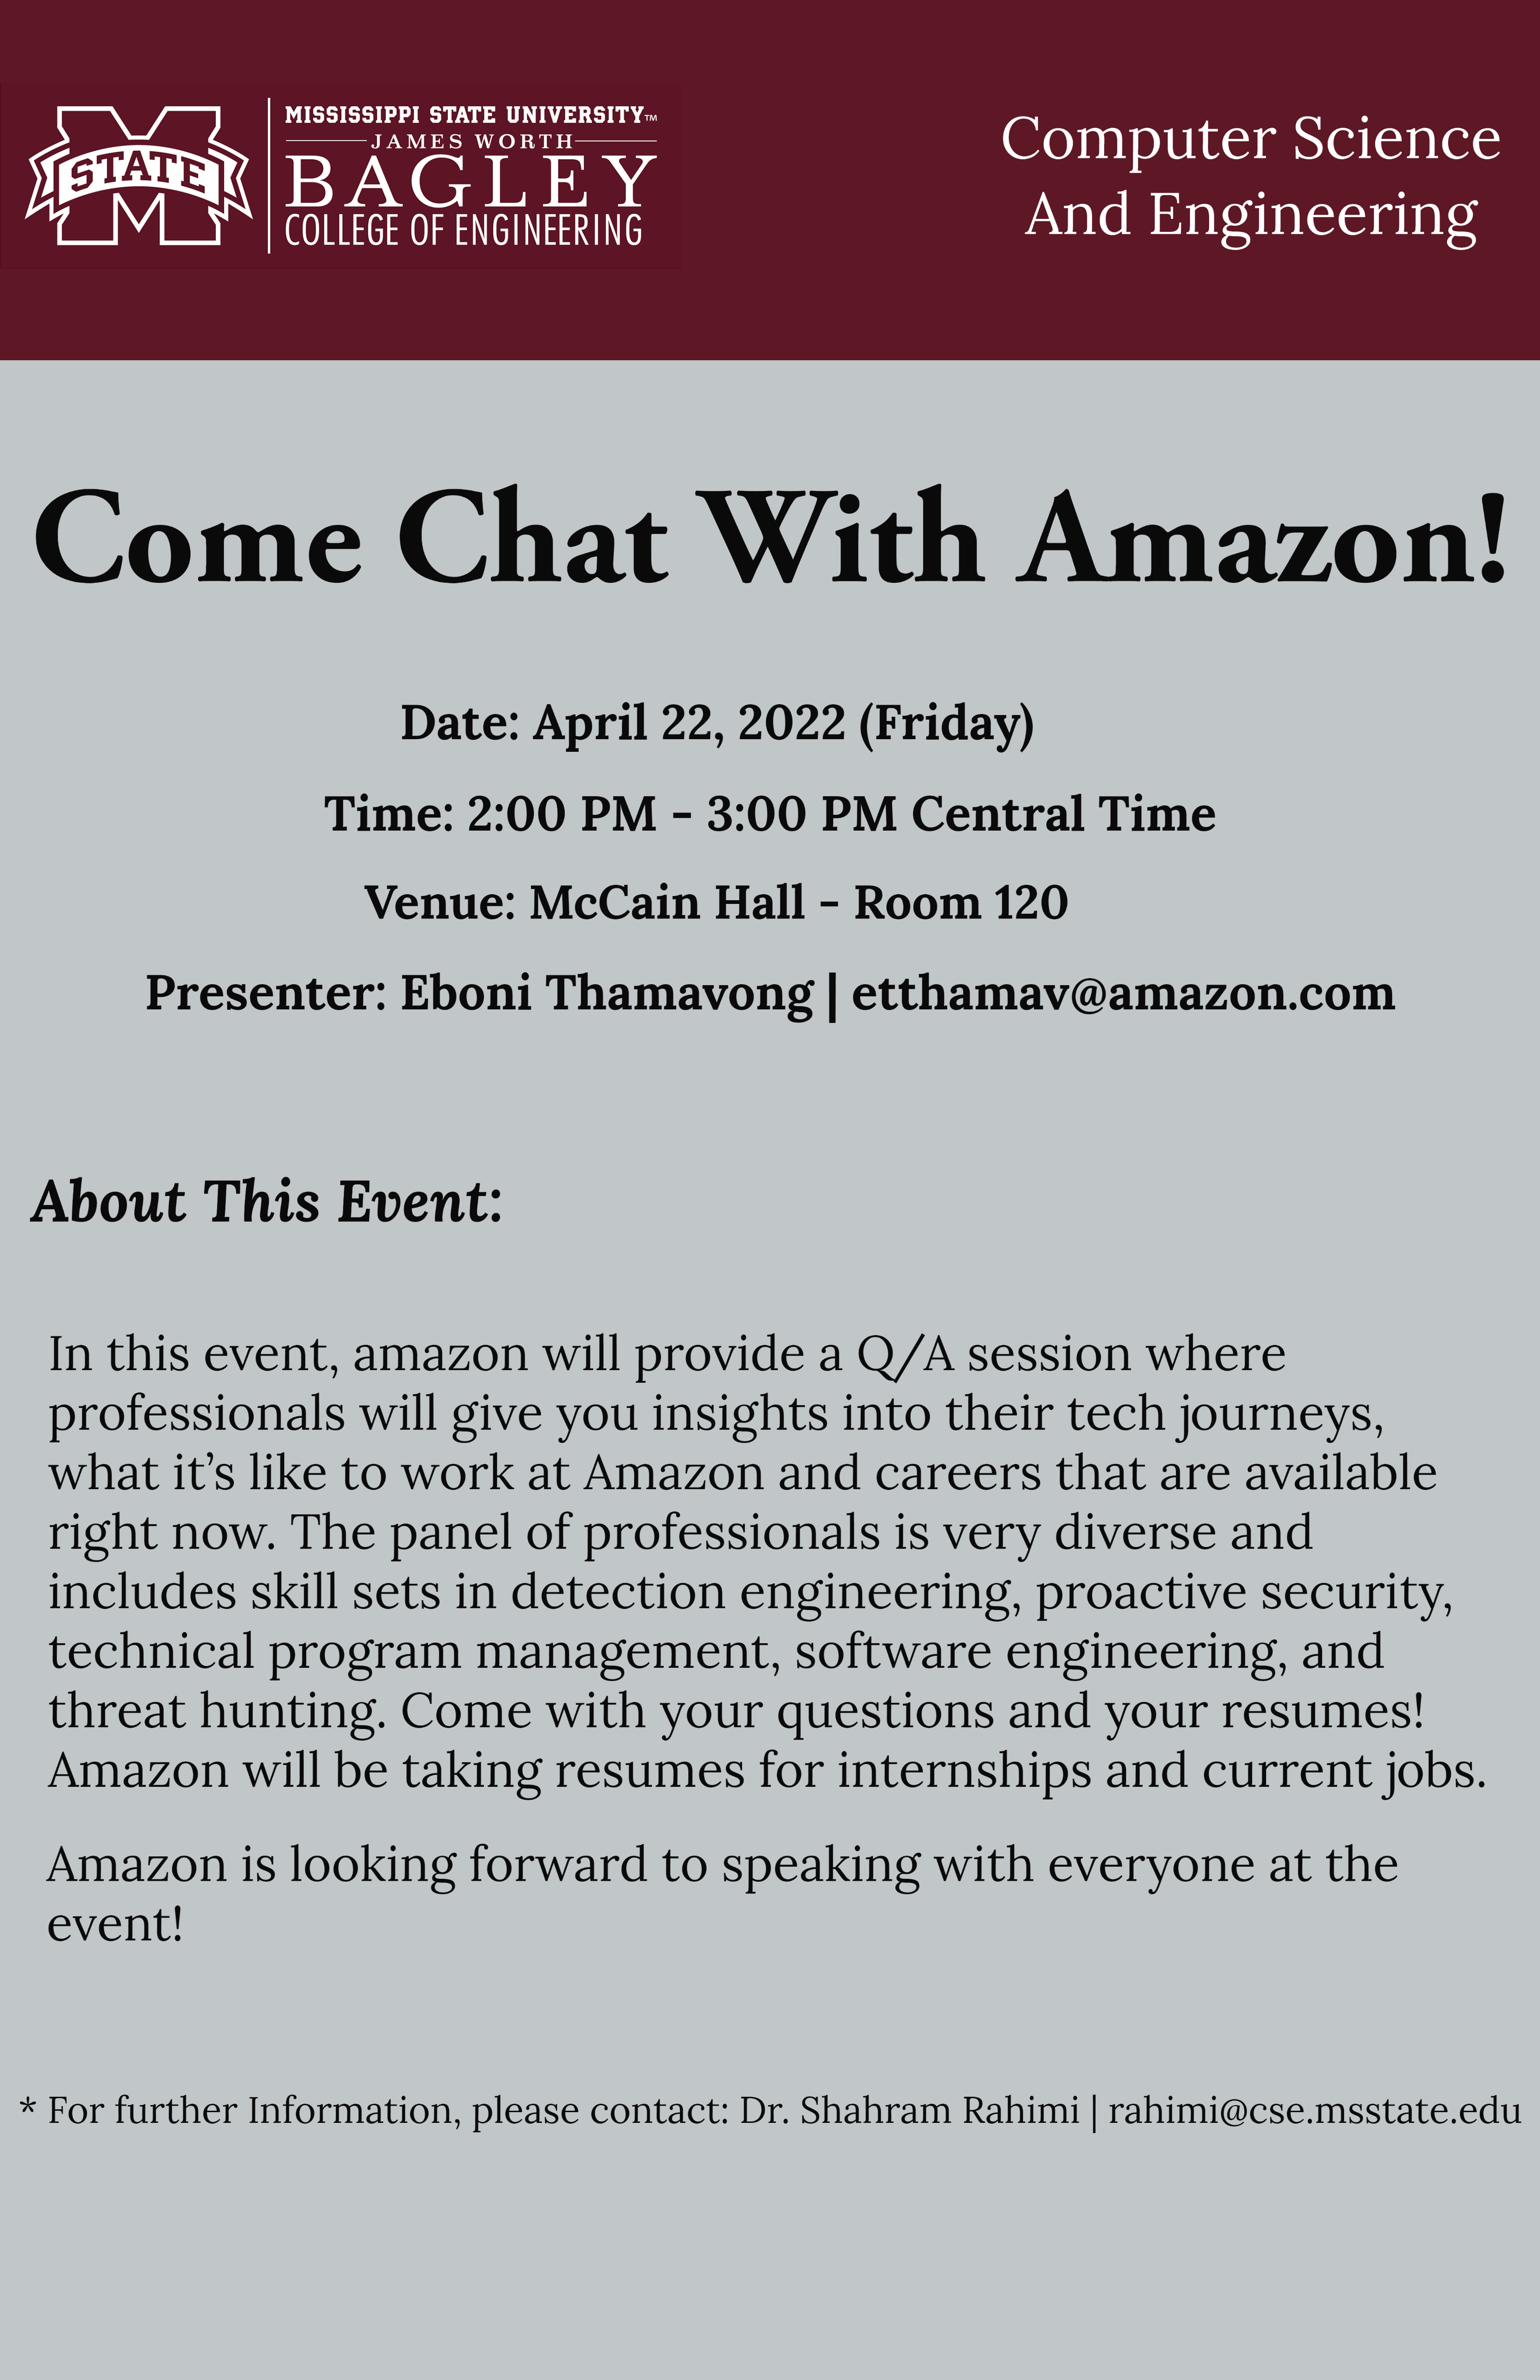 Come chat with Amazon! Friday, April 22 • 2-3 p.m. • McCain 120